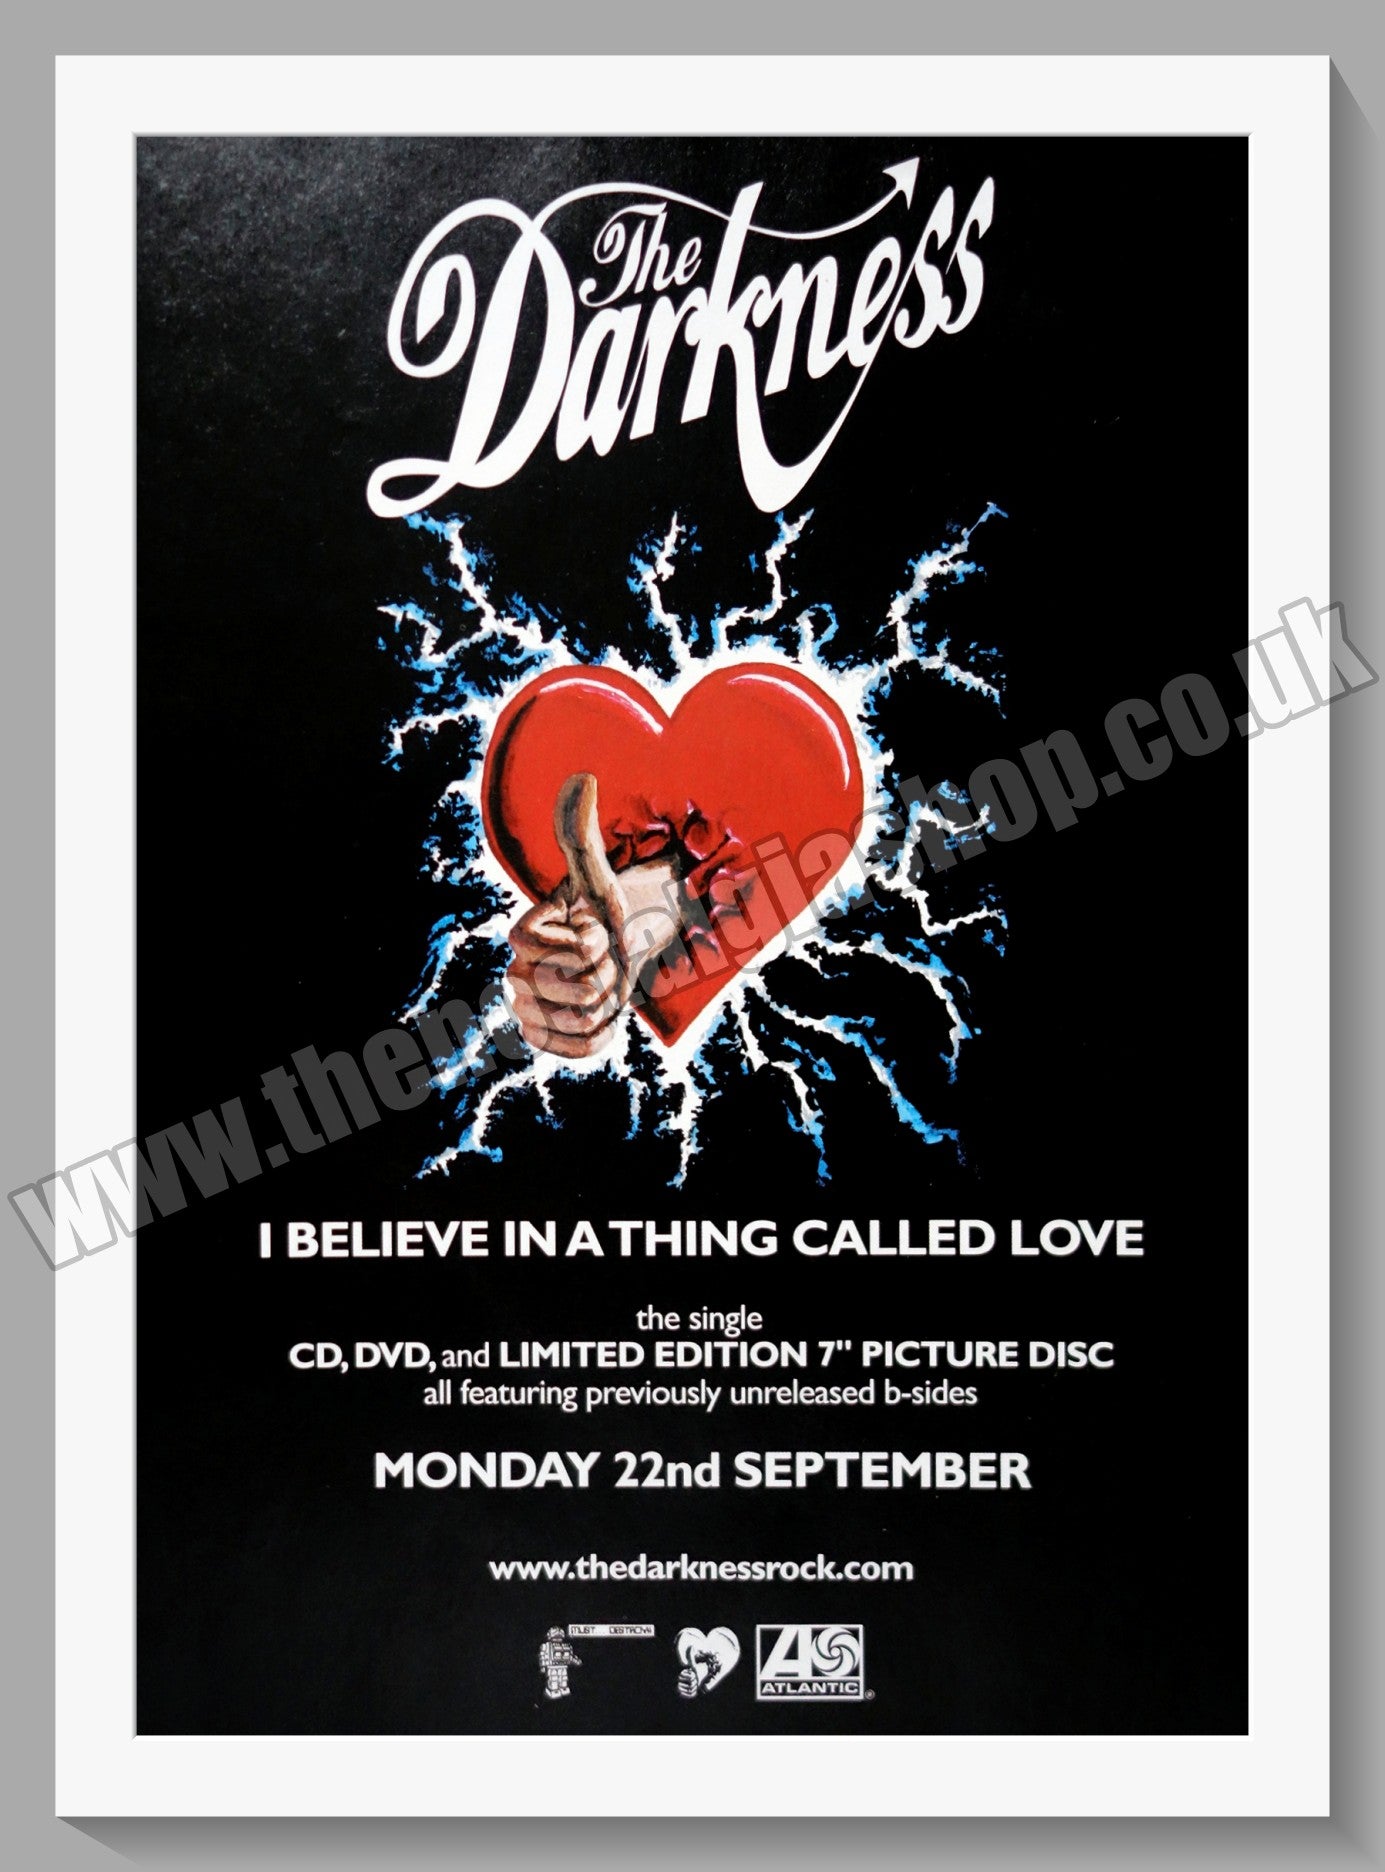 Darkness (The) I Believe In A Thing Called Love. 2004 Original Advert (ref AD60774)